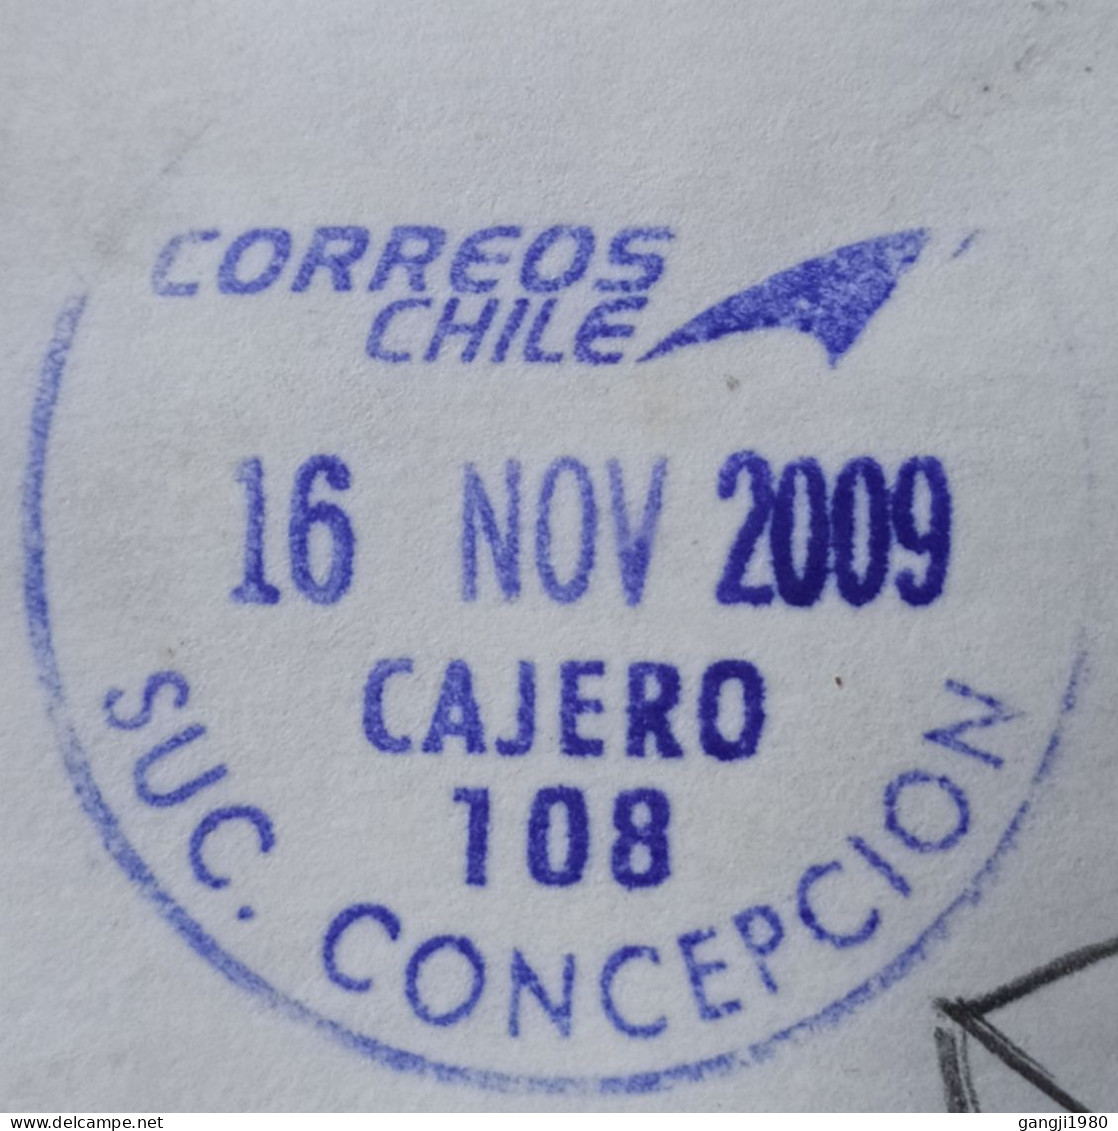 CHILE 2009, COVER USED TO INDIA, STREET TRADER, SWEEPER, BOOT POLISH MAN, FIRE FIGHTER, BUILDING, VIGNETTE LABEL, CHALAD - Chile